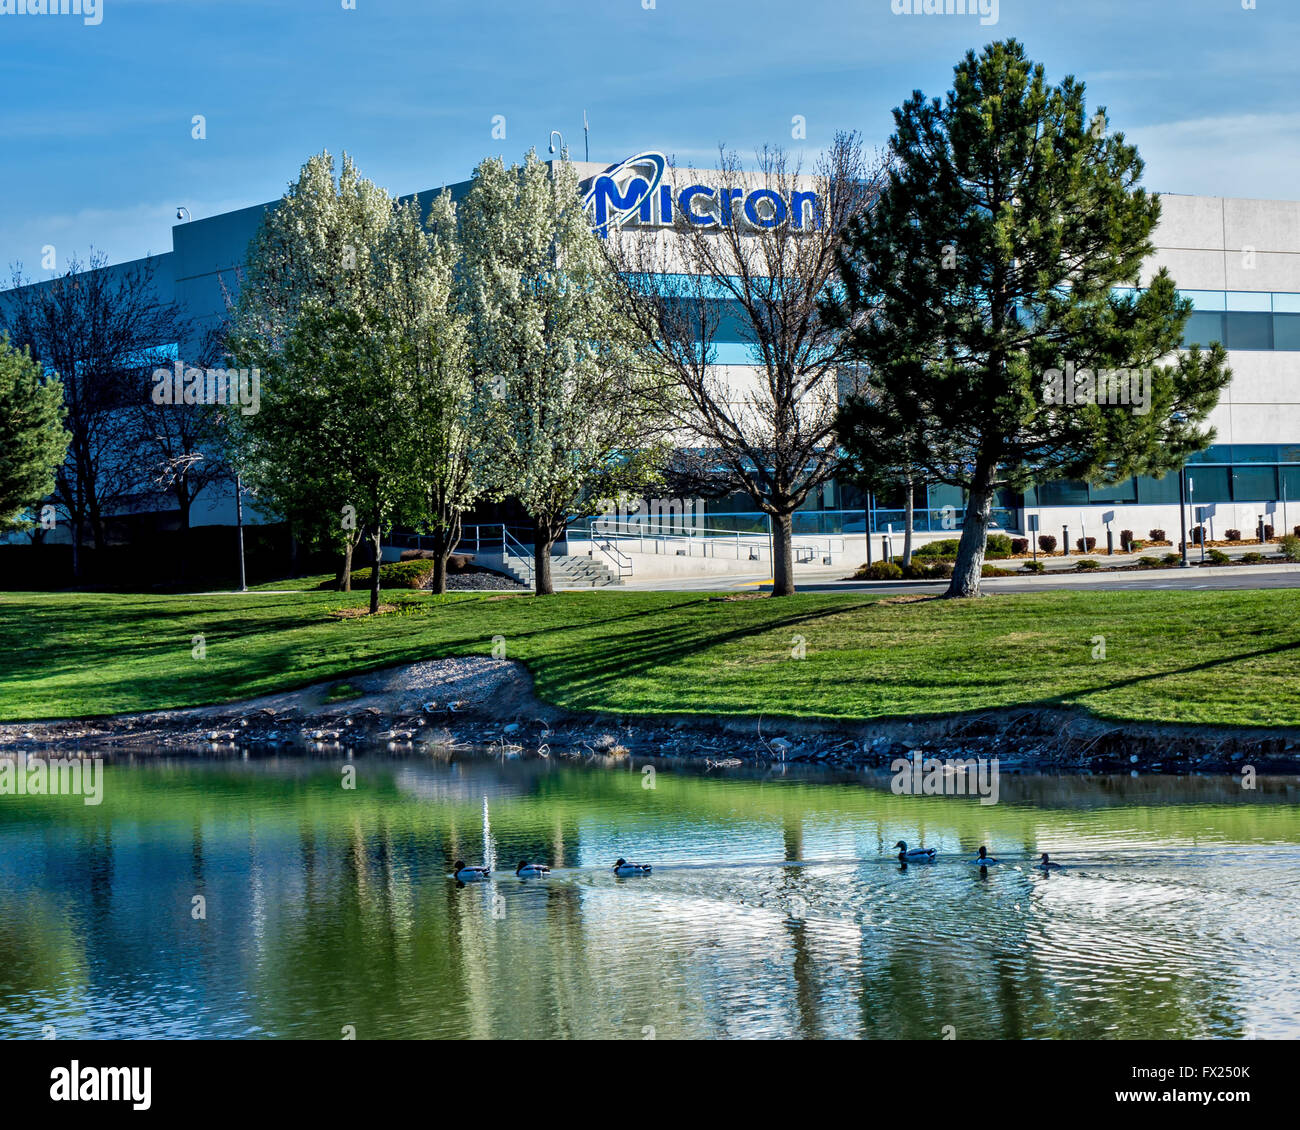 Boise, ID, USA - March 25, 2016: Micron Technology Boise . Micron is a leading company in semiconductor manufacturing. Stock Photo